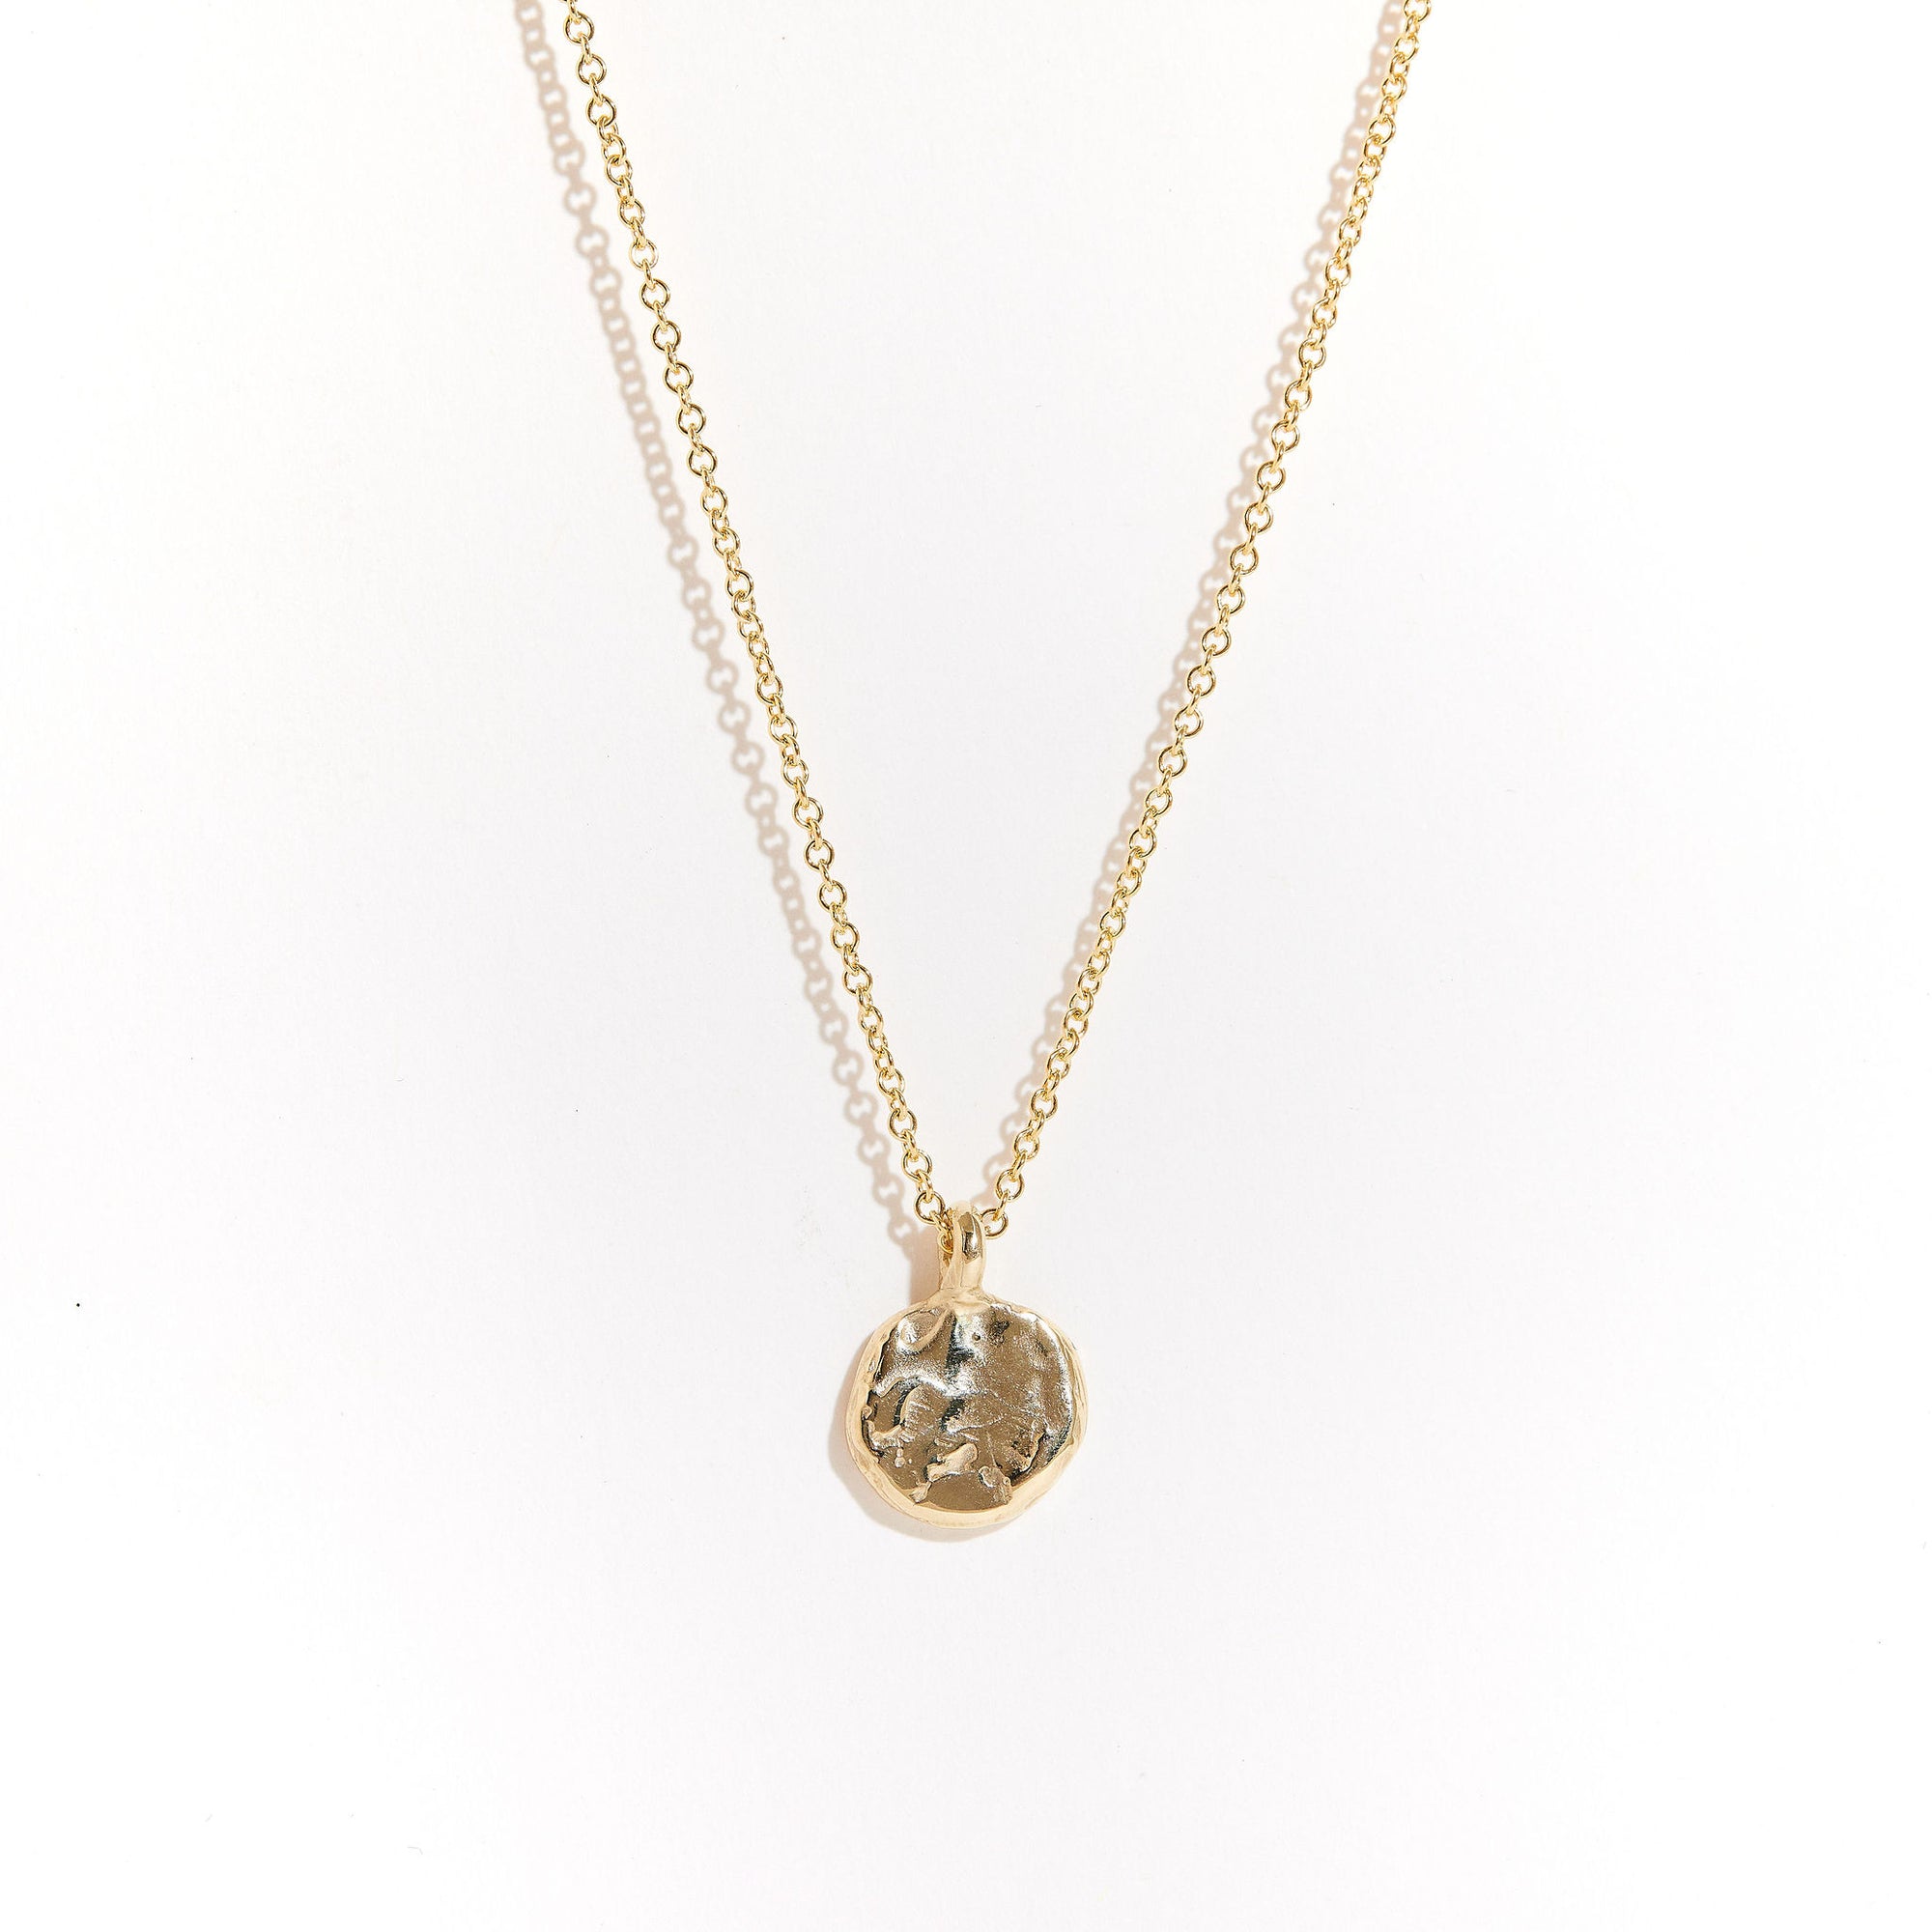 Handcrafted in Melbourne a 9ct yellow recycled, refined gold pendant with diamonds and sapphires.